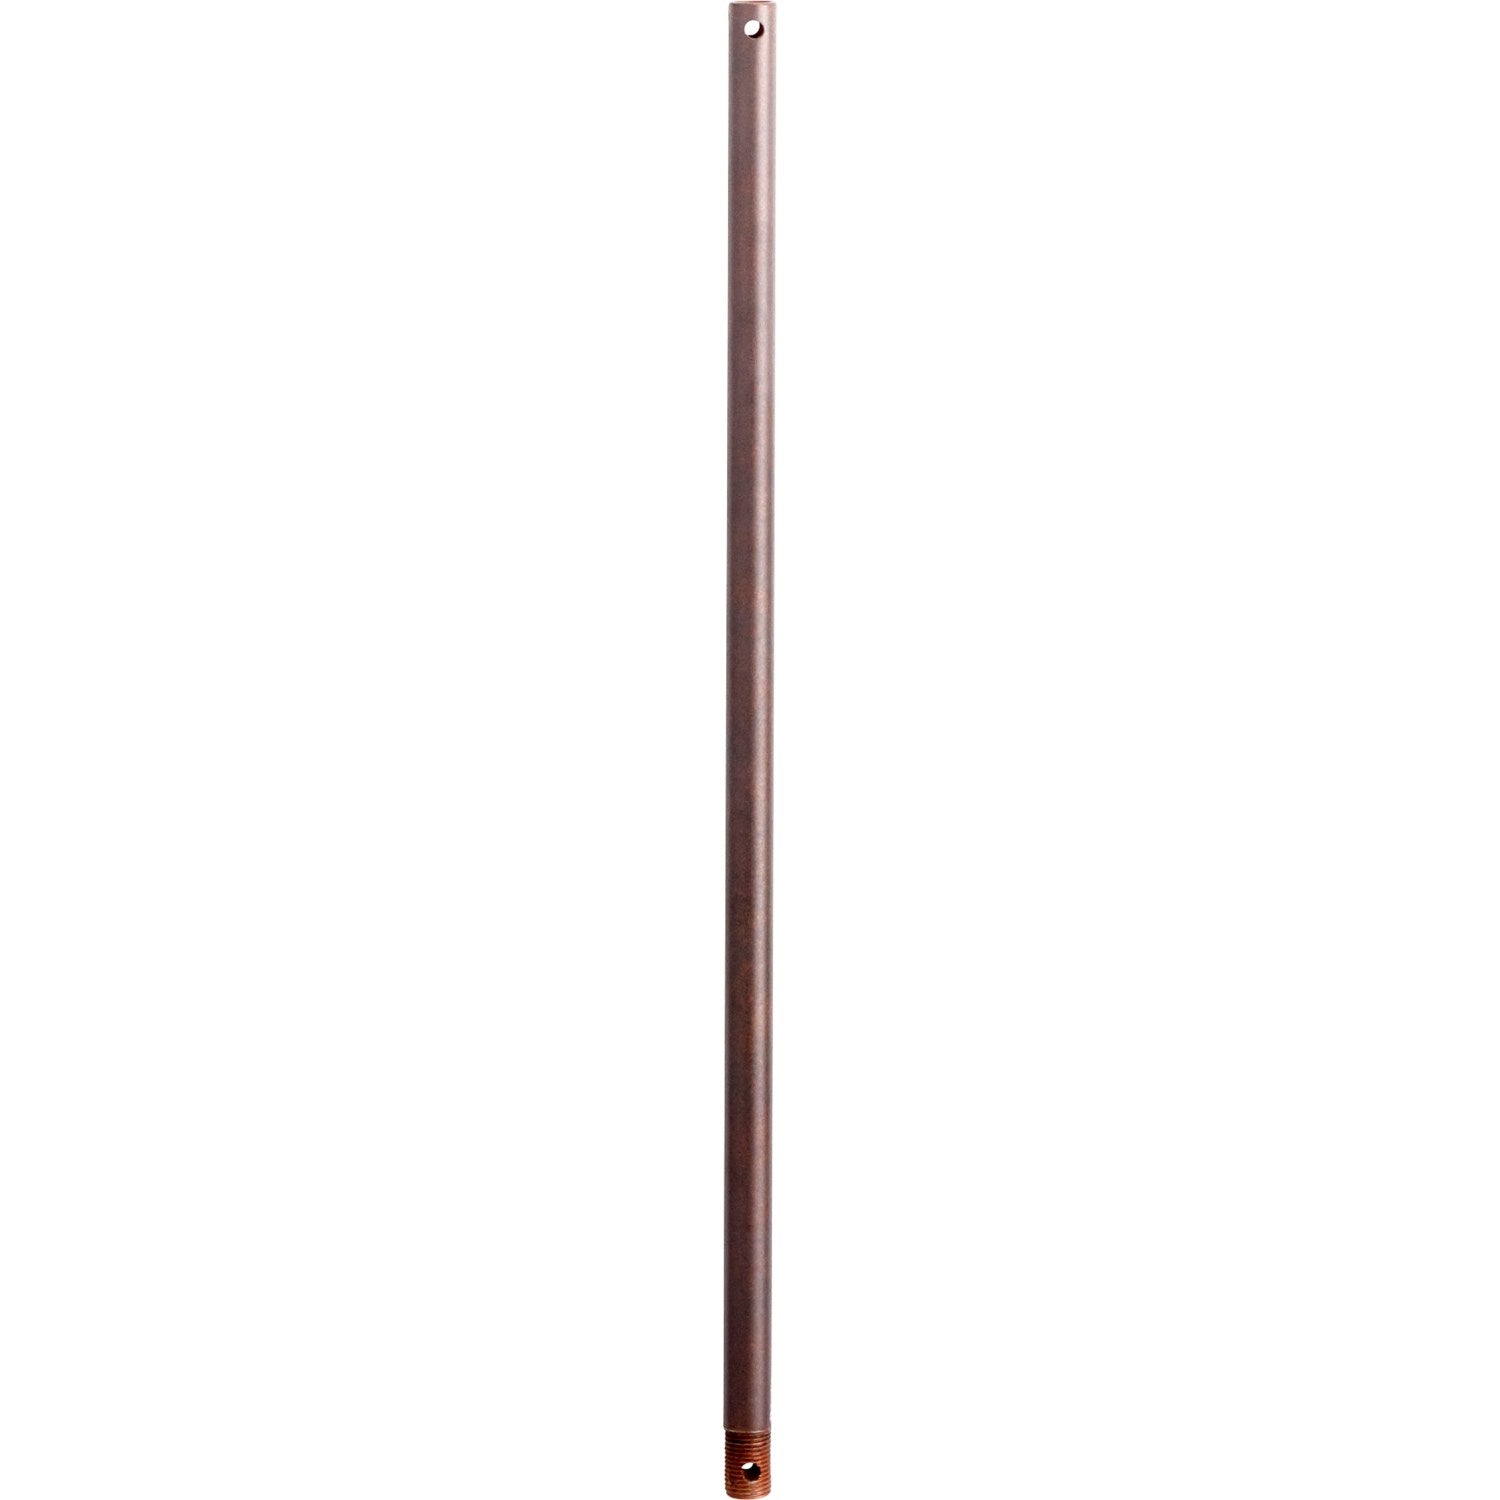 Quorum - 6-2444 - 24" Universal Downrod - 24 in. Downrods - Toasted Sienna